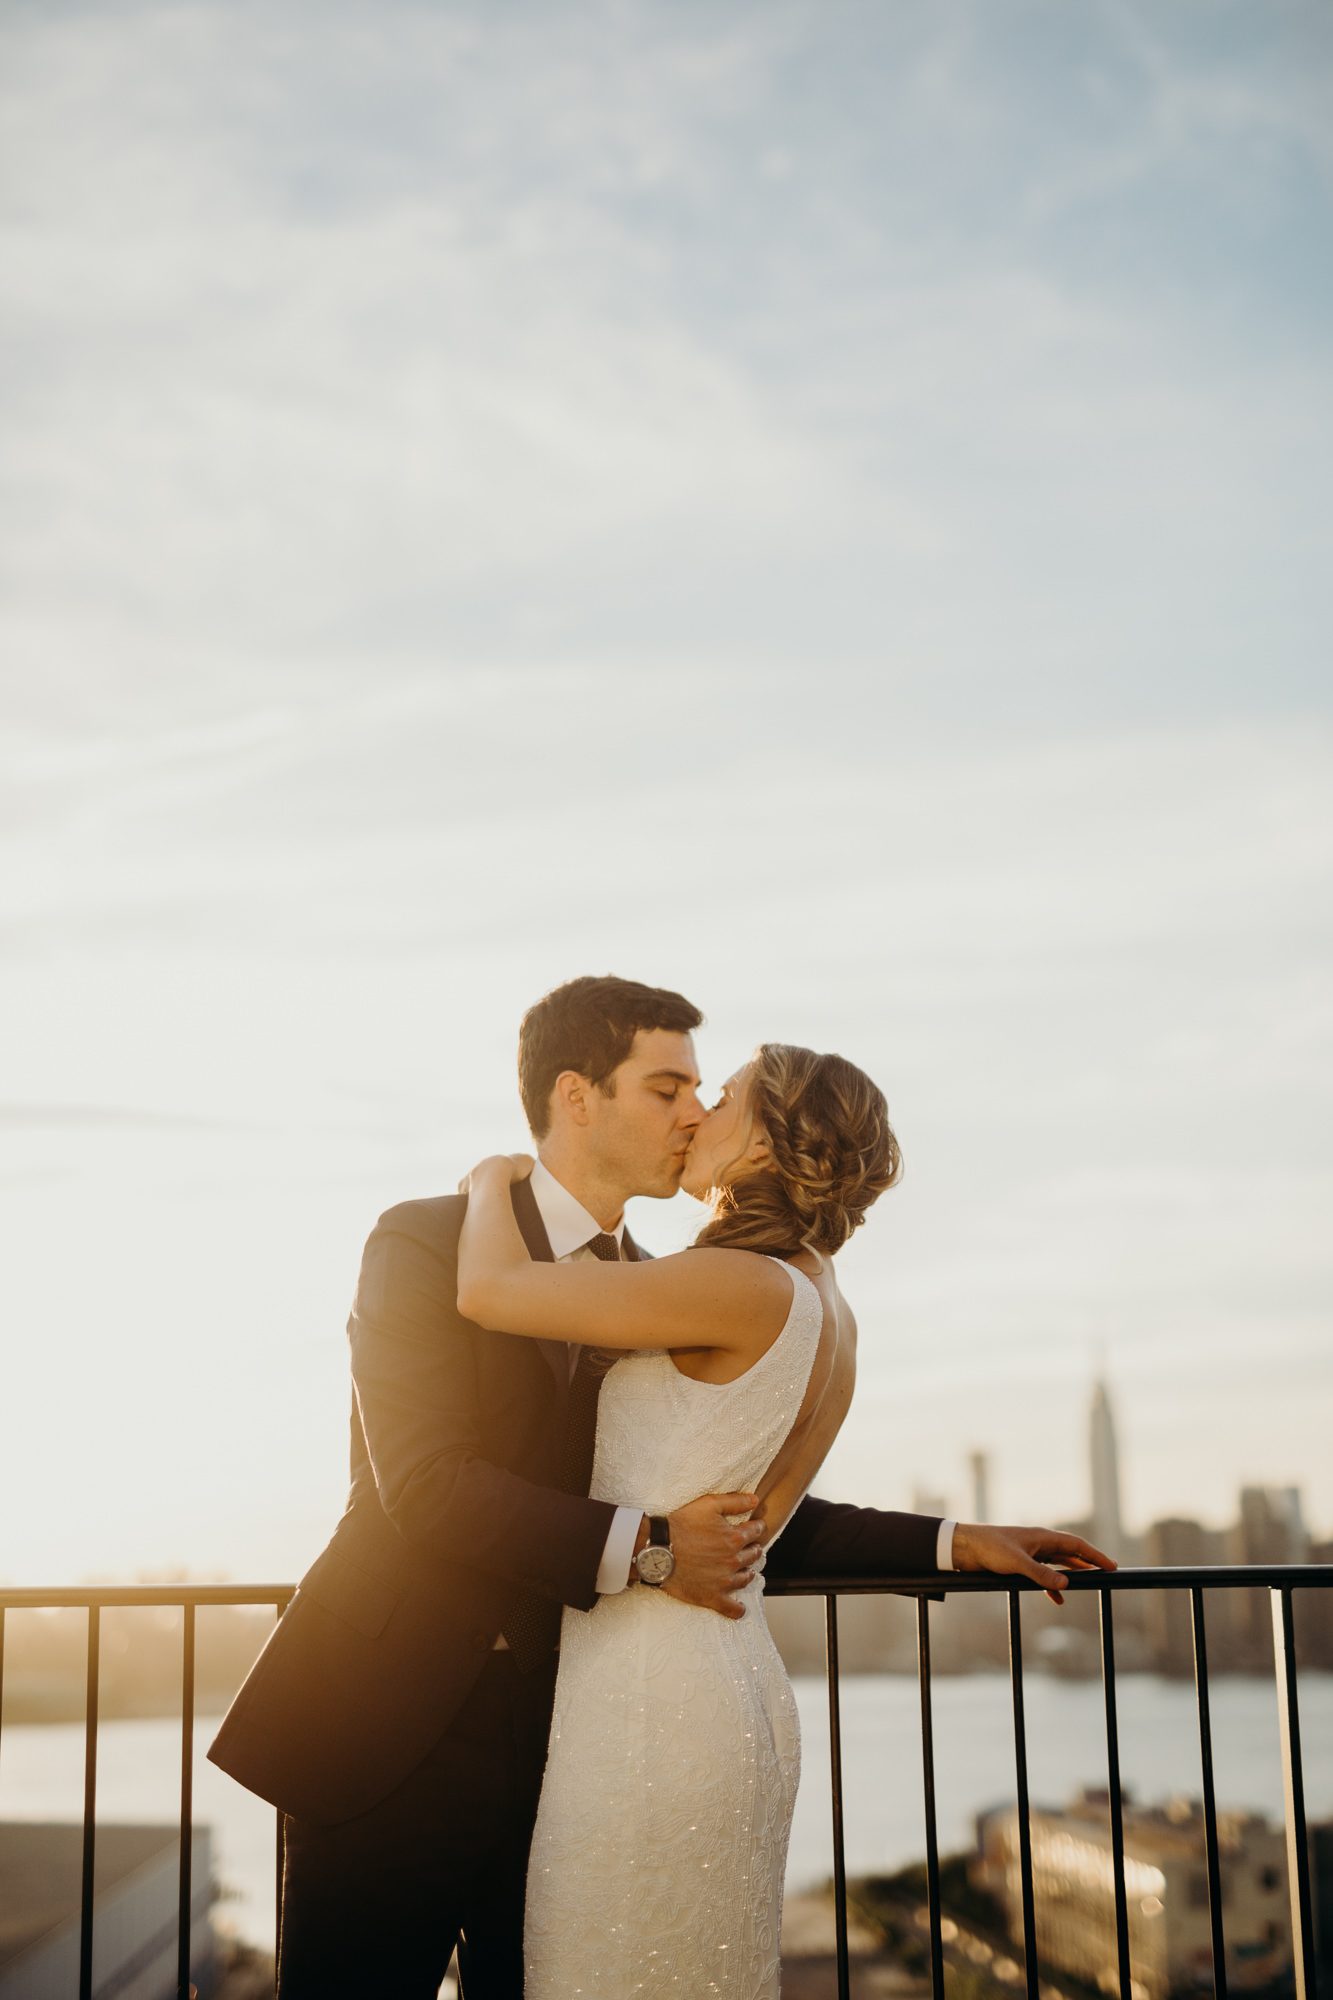 a portrait of a bride and groom during sunset at the wythe hotel in brooklyn, new york city